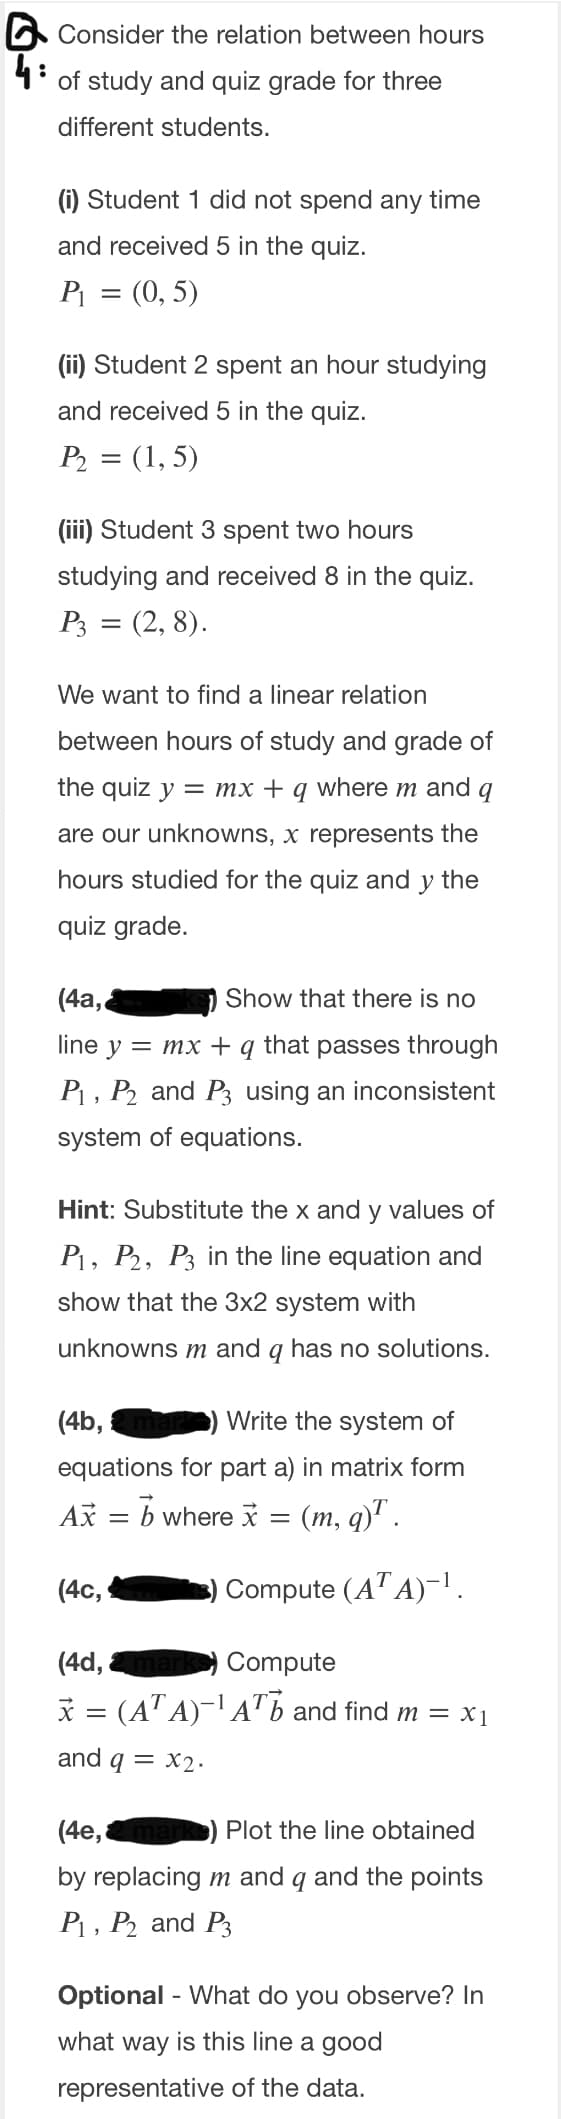 O Consider the relation between hours
4:
of study and quiz grade for three
different students.
(i) Student 1 did not spend any time
and received 5 in the quiz.
P = (0, 5)
(ii) Student 2 spent an hour studying
and received 5 in the quiz.
P2 = (1, 5)
(iii) Student 3 spent two hours
studying and received 8 in the quiz.
P3 = (2, 8).
We want to find a linear relation
between hours of study and grade of
the quiz y = mx + q where m and q
are our unknowns, x represents the
hours studied for the quiz and y the
quiz grade.
(4a,
Show that there is no
line y — mх +
that
passes through
P1 , P and P3 using an inconsistent
system of equations.
Hint: Substitute the x and y values of
P1, P2, P3 in the line equation and
show that the 3x2 system with
unknowns m and q has no solutions.
(4b,
Write the system of
equations for part a) in matrix form
Ax = b where i = (m, q)' .
(4с,
Compute (A" A)-1.
(4d,
Compute
* = (AT A)- A" b and find m = x1
and q = x2·
(4e,
Plot the line obtained
by replacing m and q and the points
P1, P and P3
Optional - What do you observe? In
what way is this line a good
representative of the data.
